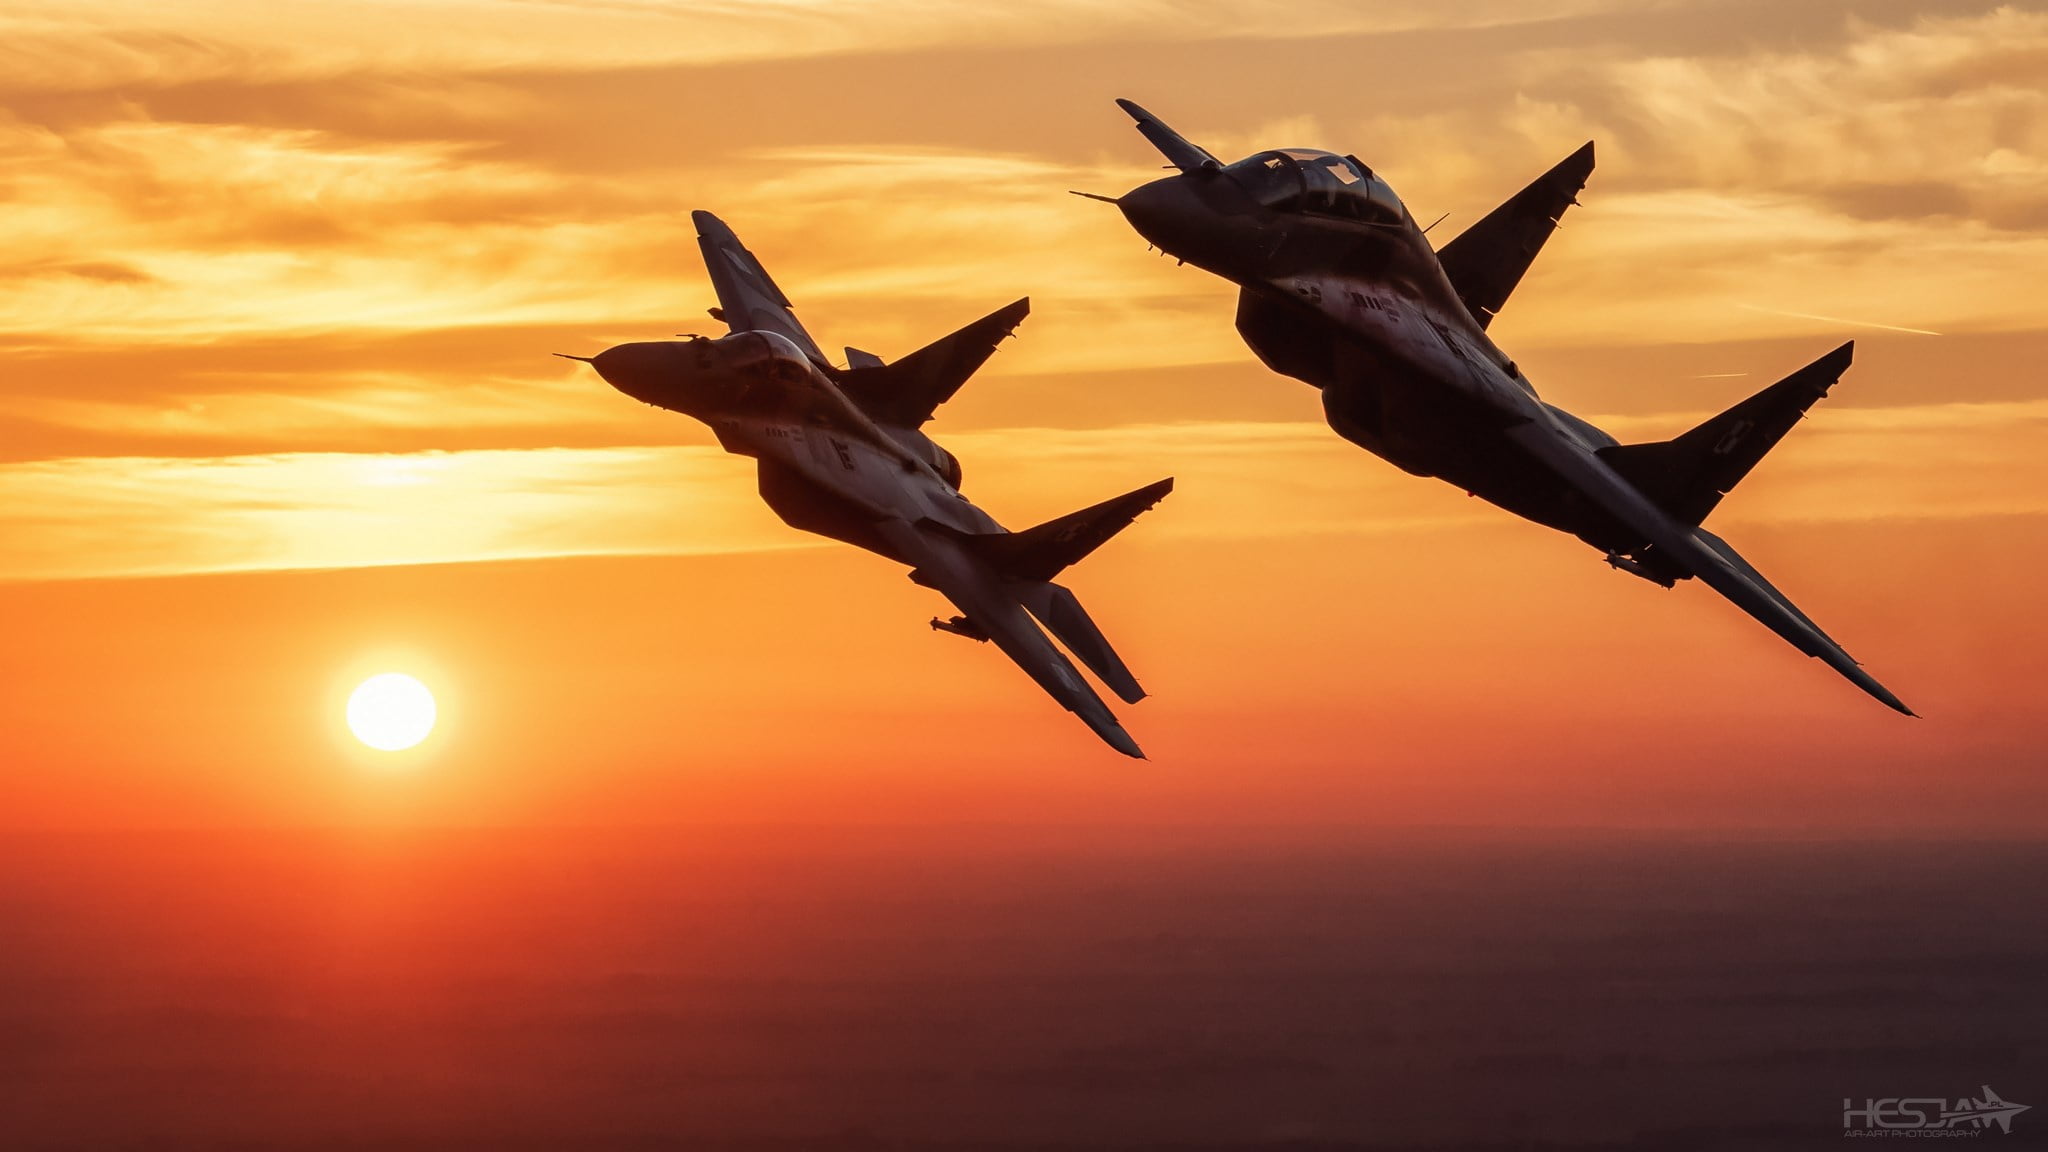 Sunset, The sky, Clouds, Fighter, The MiG-29, Polish air force